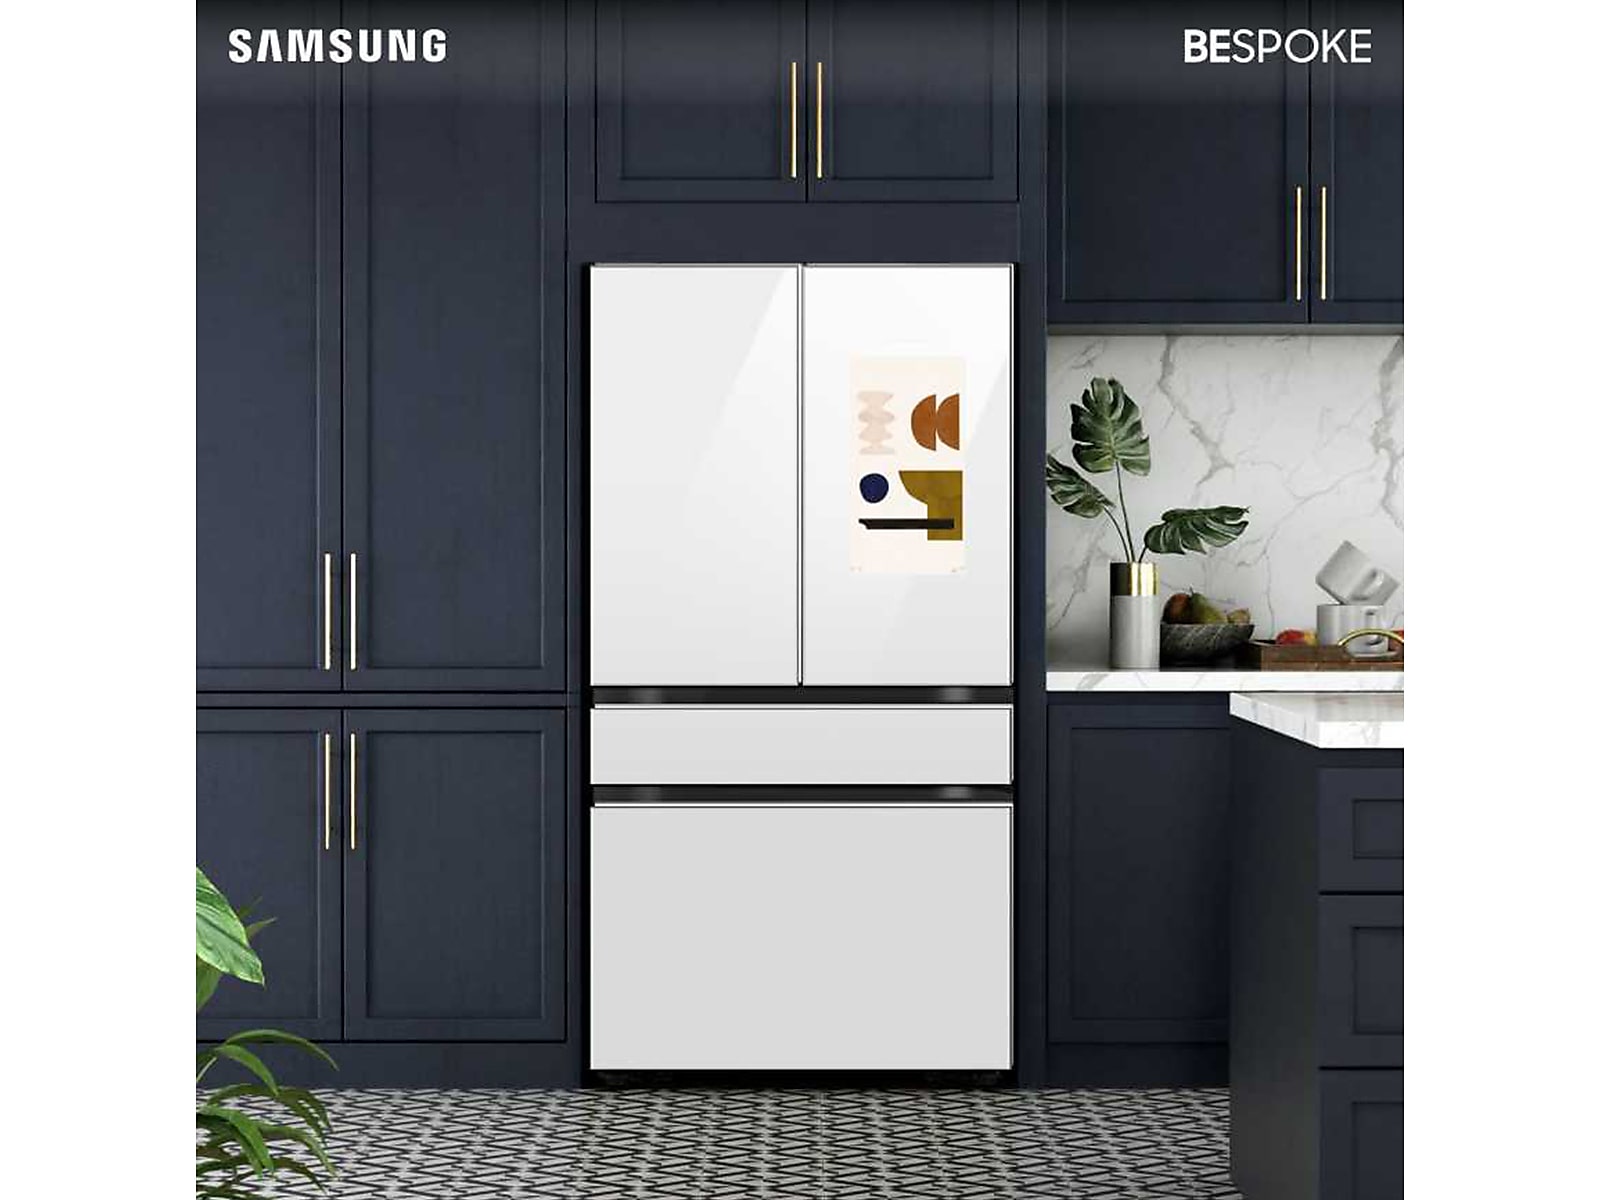 Samsung Bespoke 4-Door French Door Refrigerator (23 cu. ft.) - with Family Hub™ Panel in White Glass - (with Customizable Door Panel Colors) in White Glass photo